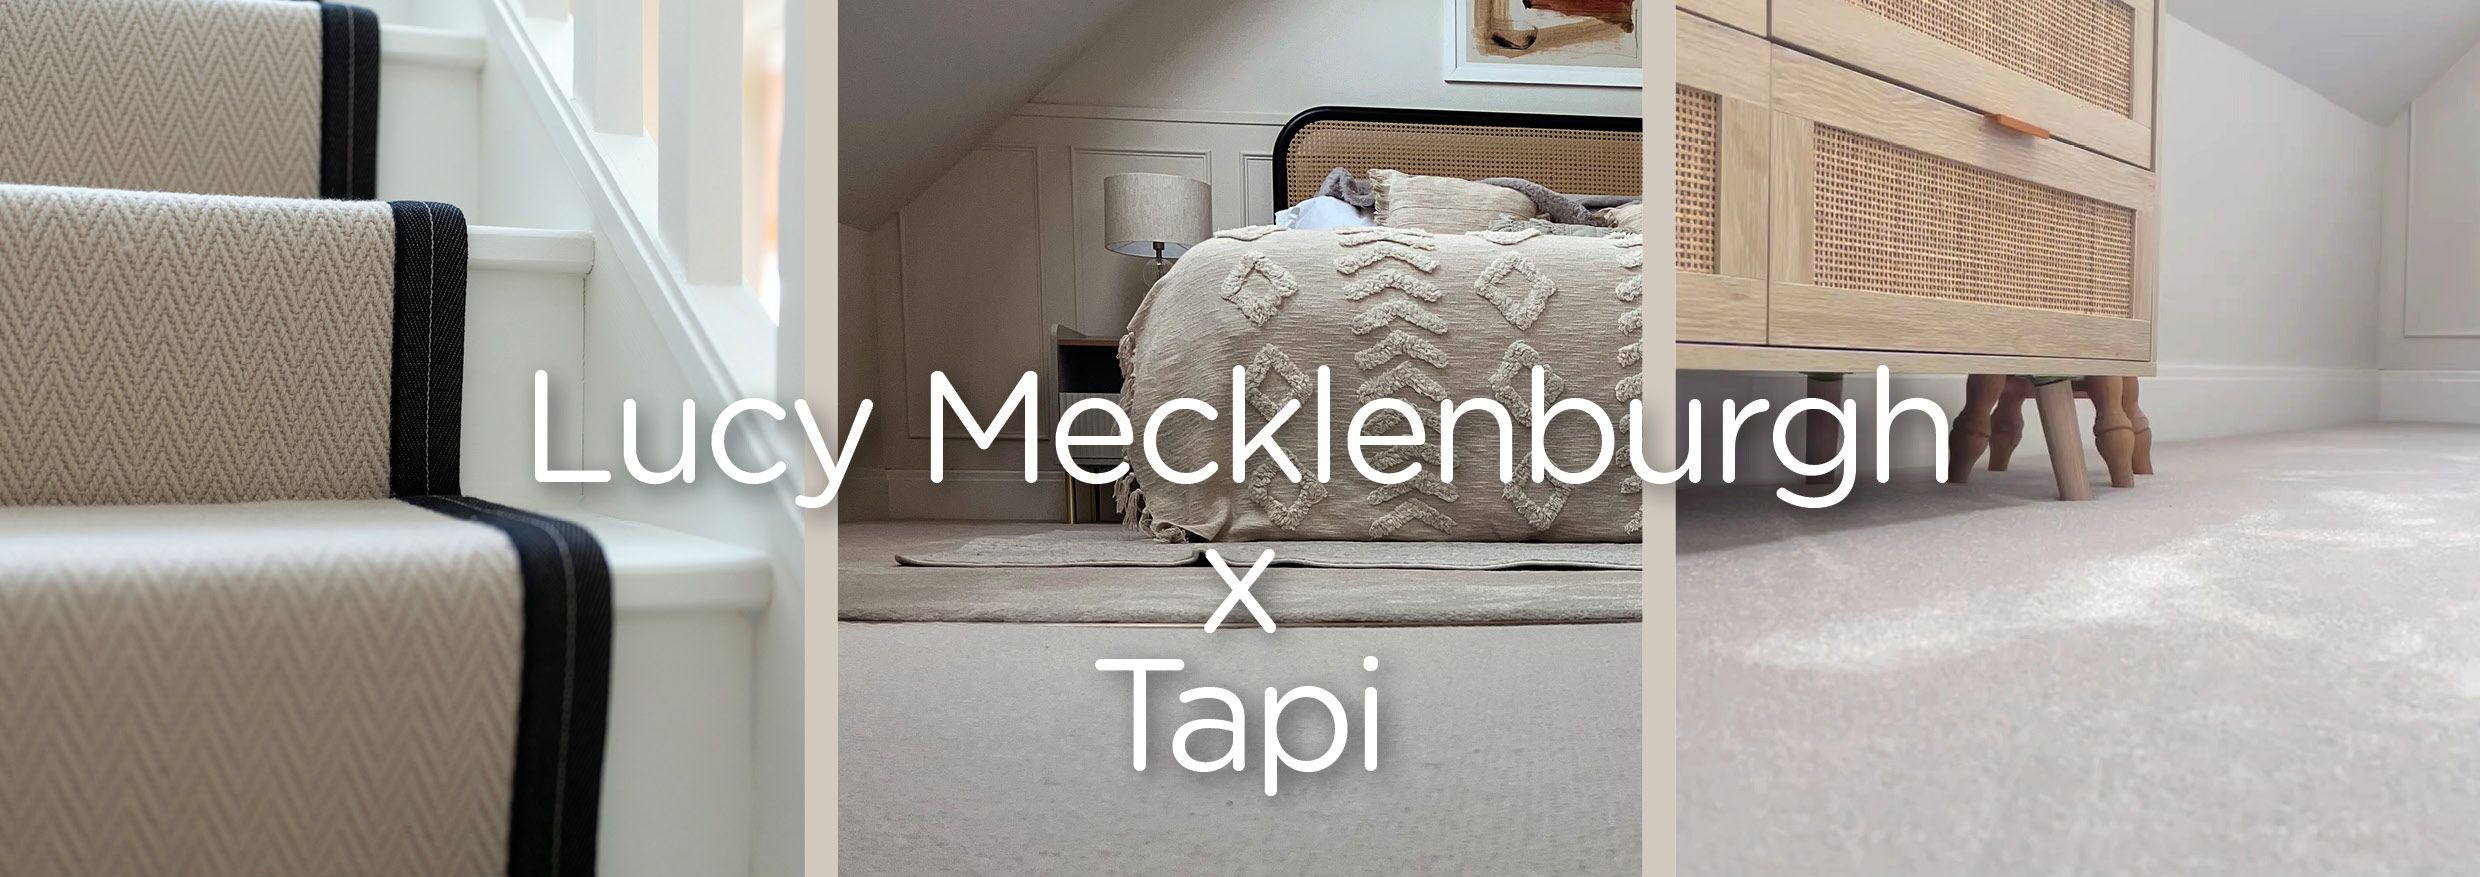 Lucy Mecklenburgh x Tapi Competition!